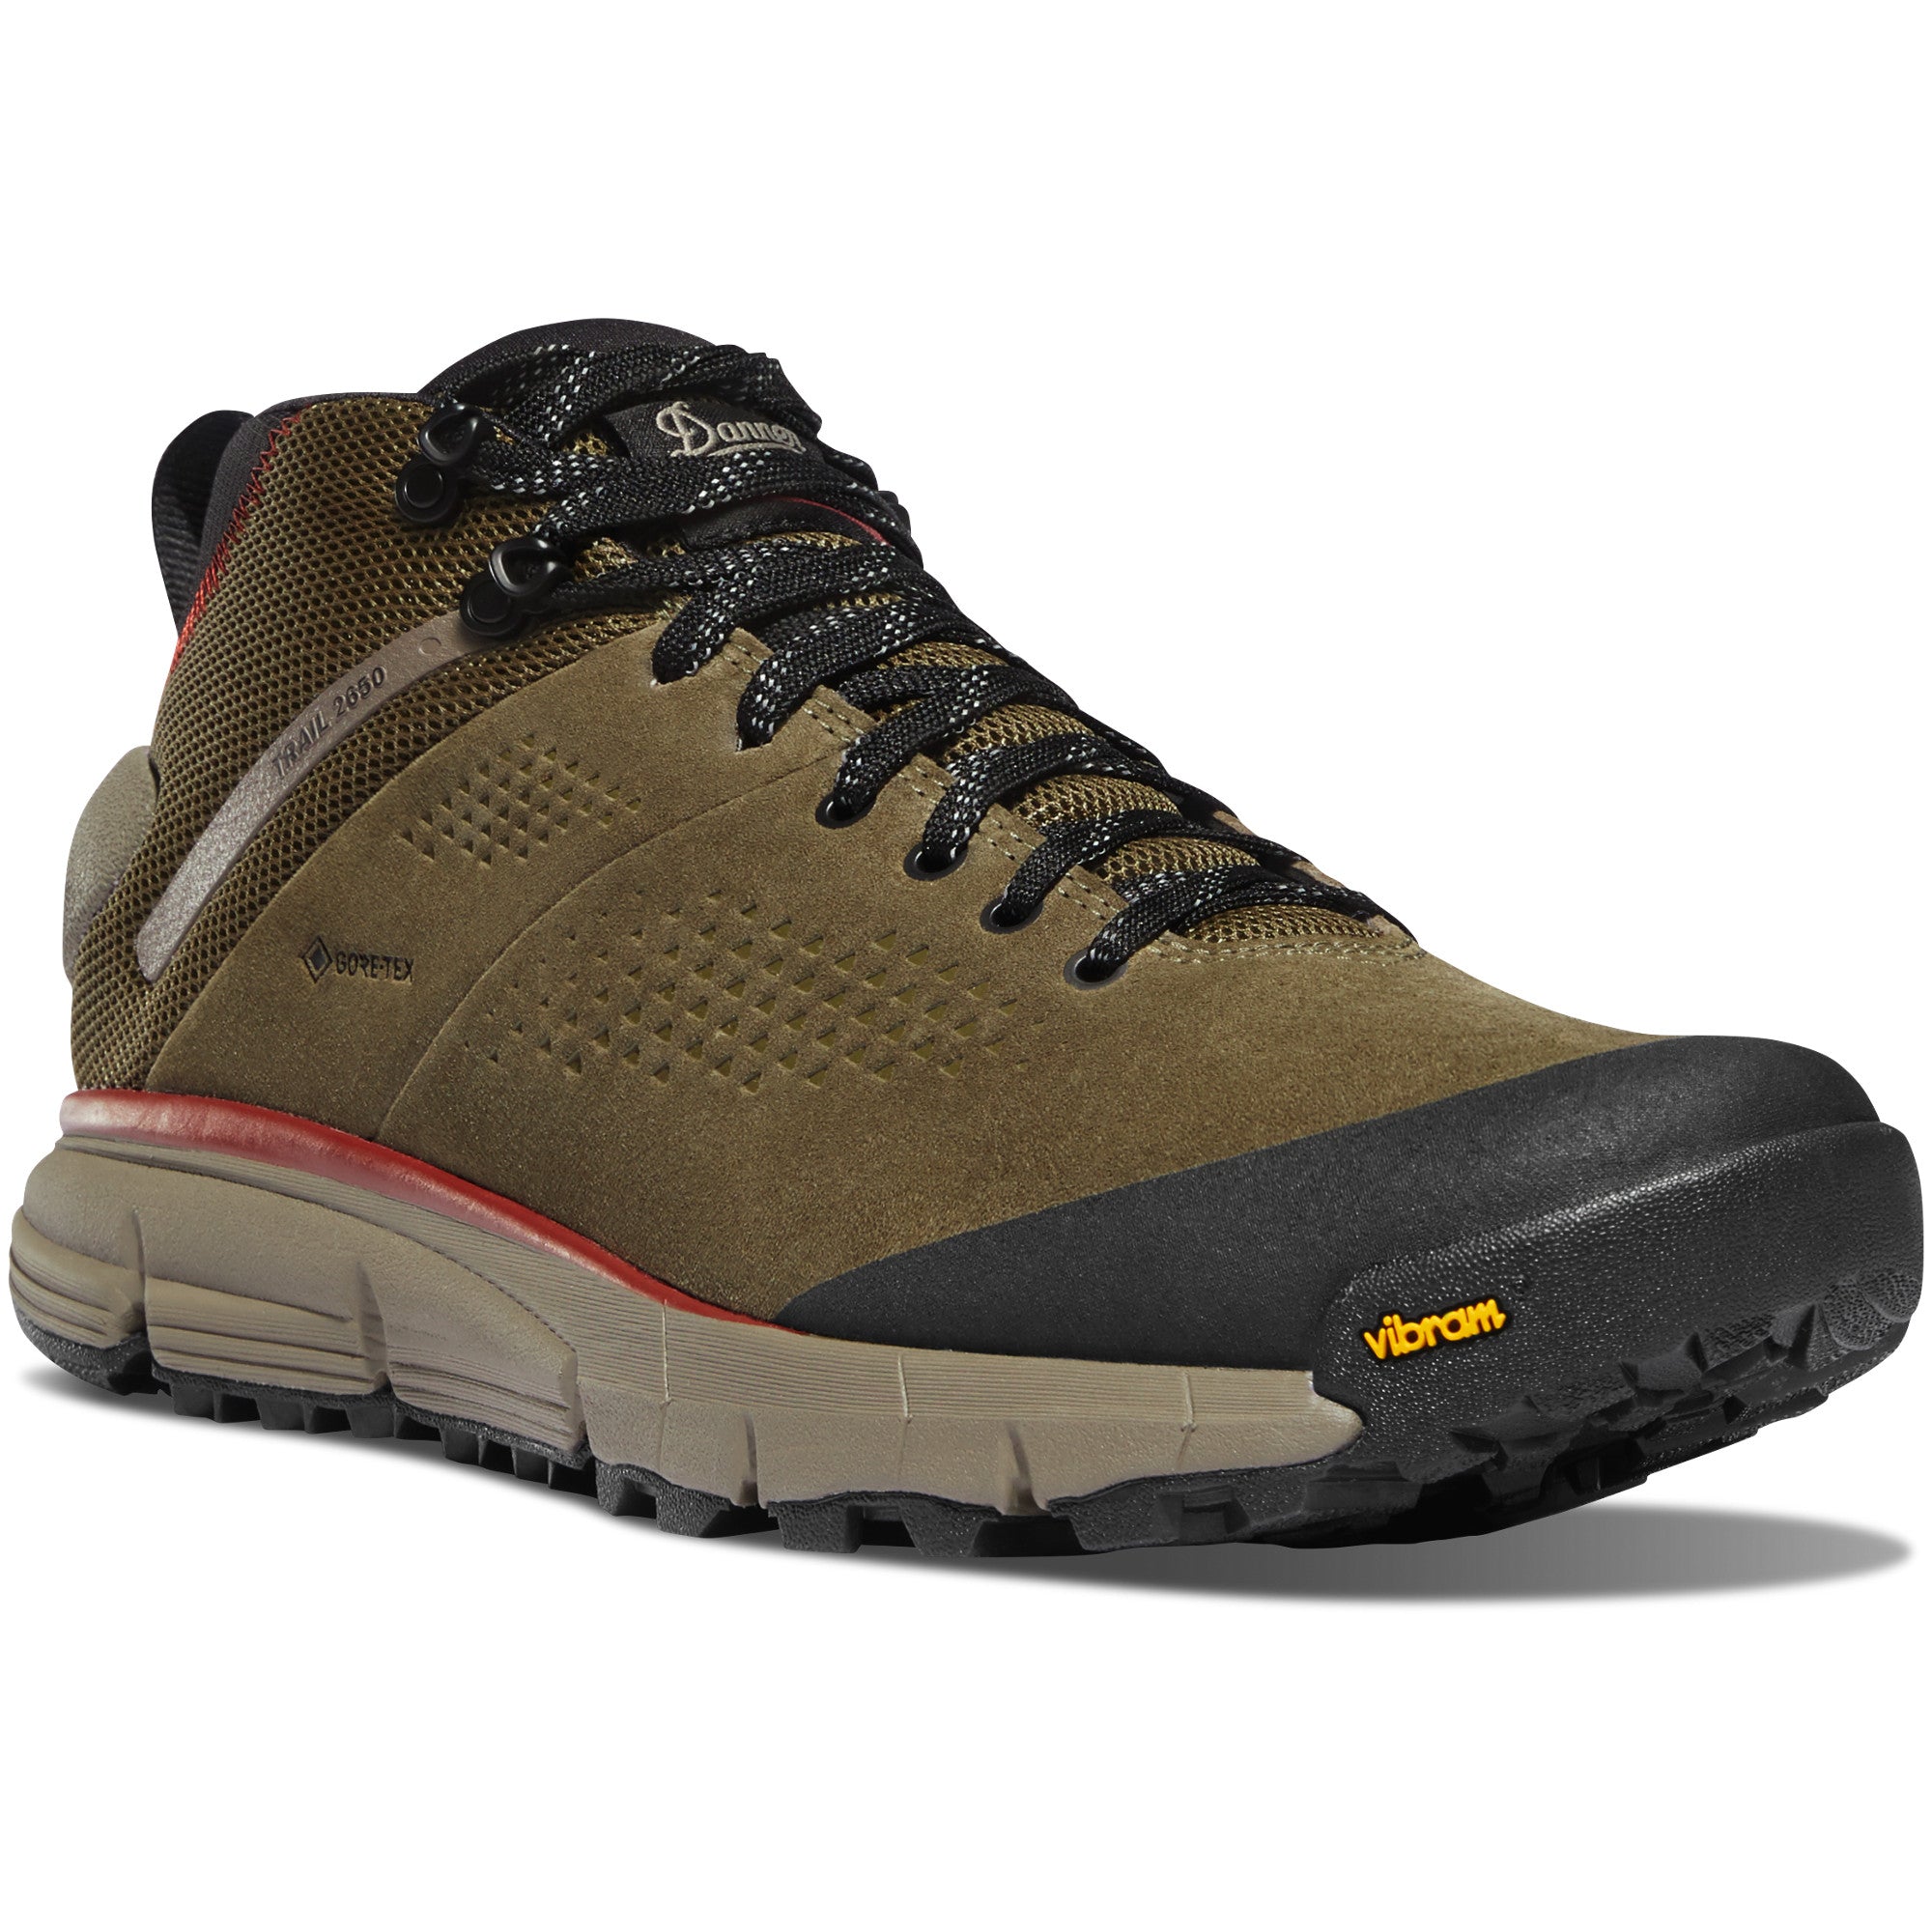 Danner Men's Trail 2650 Mid 4" Gore-Tex Waterproof Hiking Boot in Dusty Olive from the side